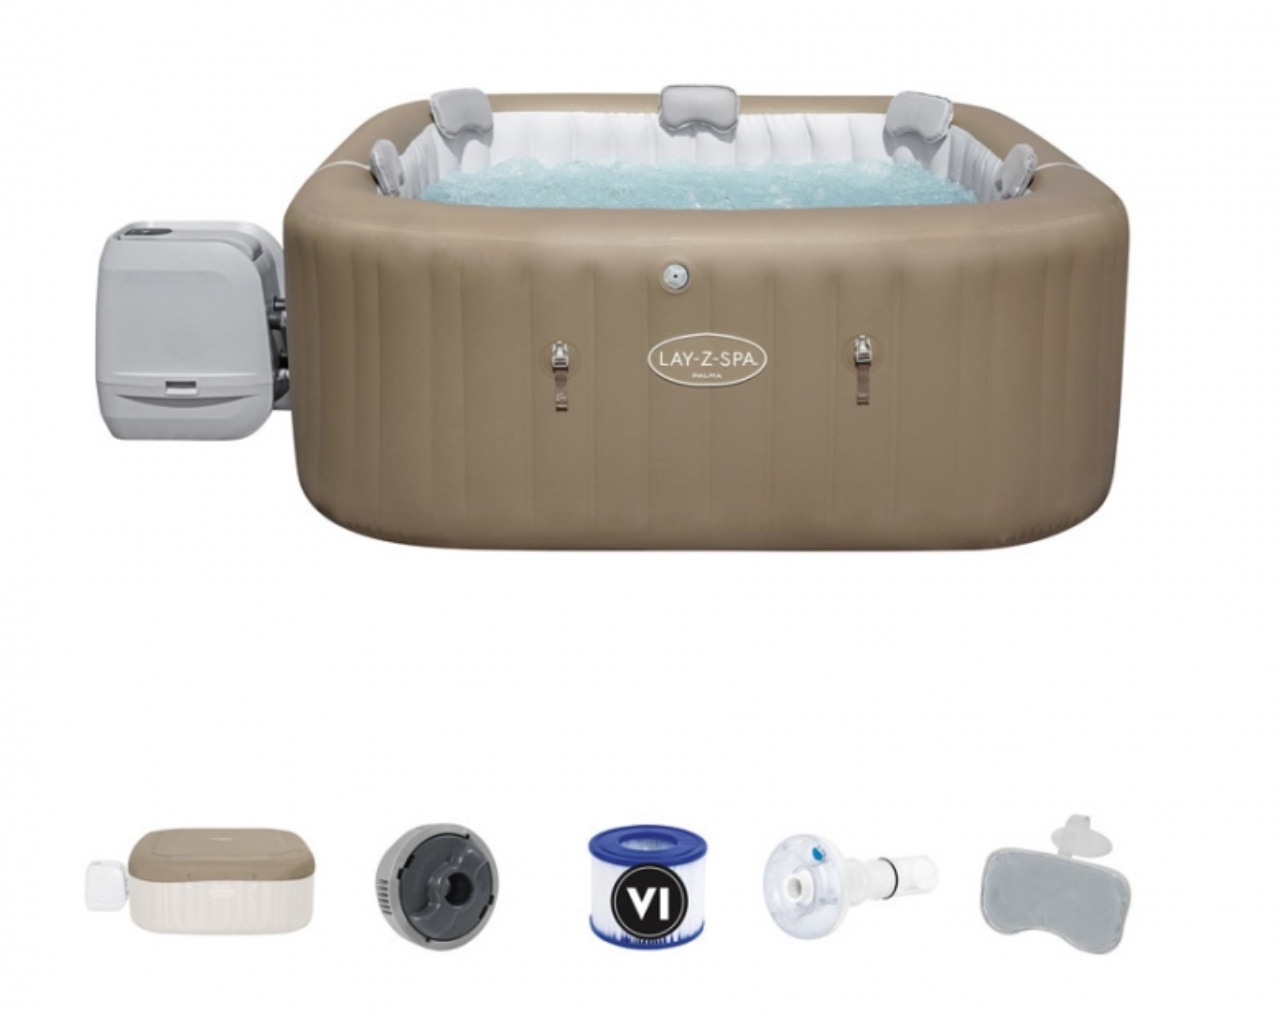 Spa gonflable carre PALMA Hydrojet Pro Bestway Lay-Z-Spa LED 5 a 7 personnes avec banquettes